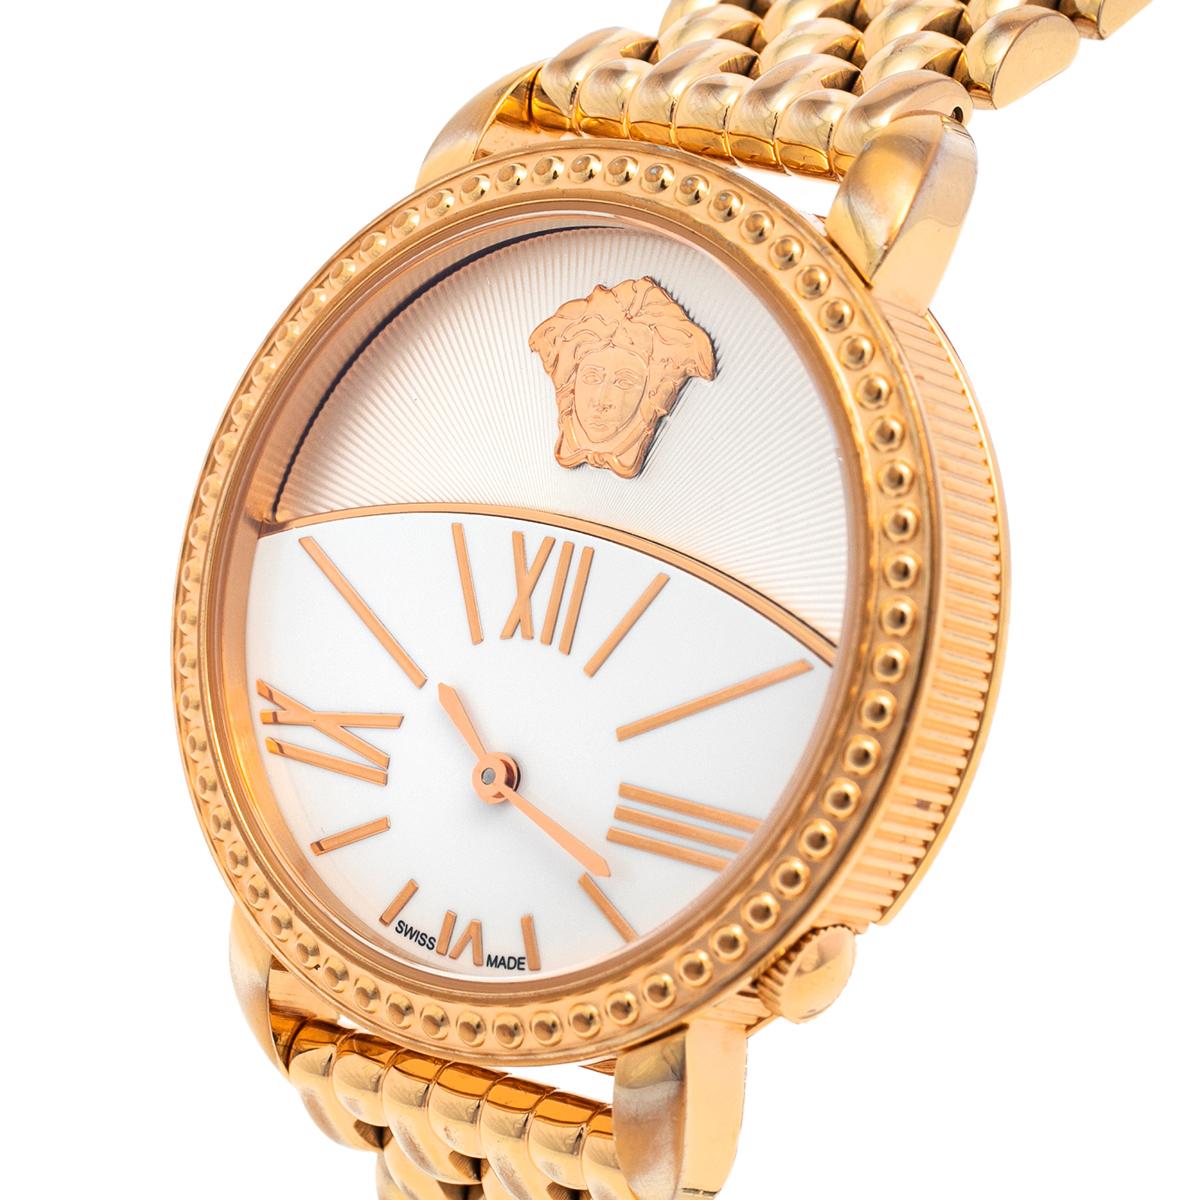 Creations from Versace promise a grand style with everything eye-catching and this Krios watch from the label demonstrates just that. The watch has a gold-plated stainless steel case and a link bracelet secured with a concealed clasp. It is graced